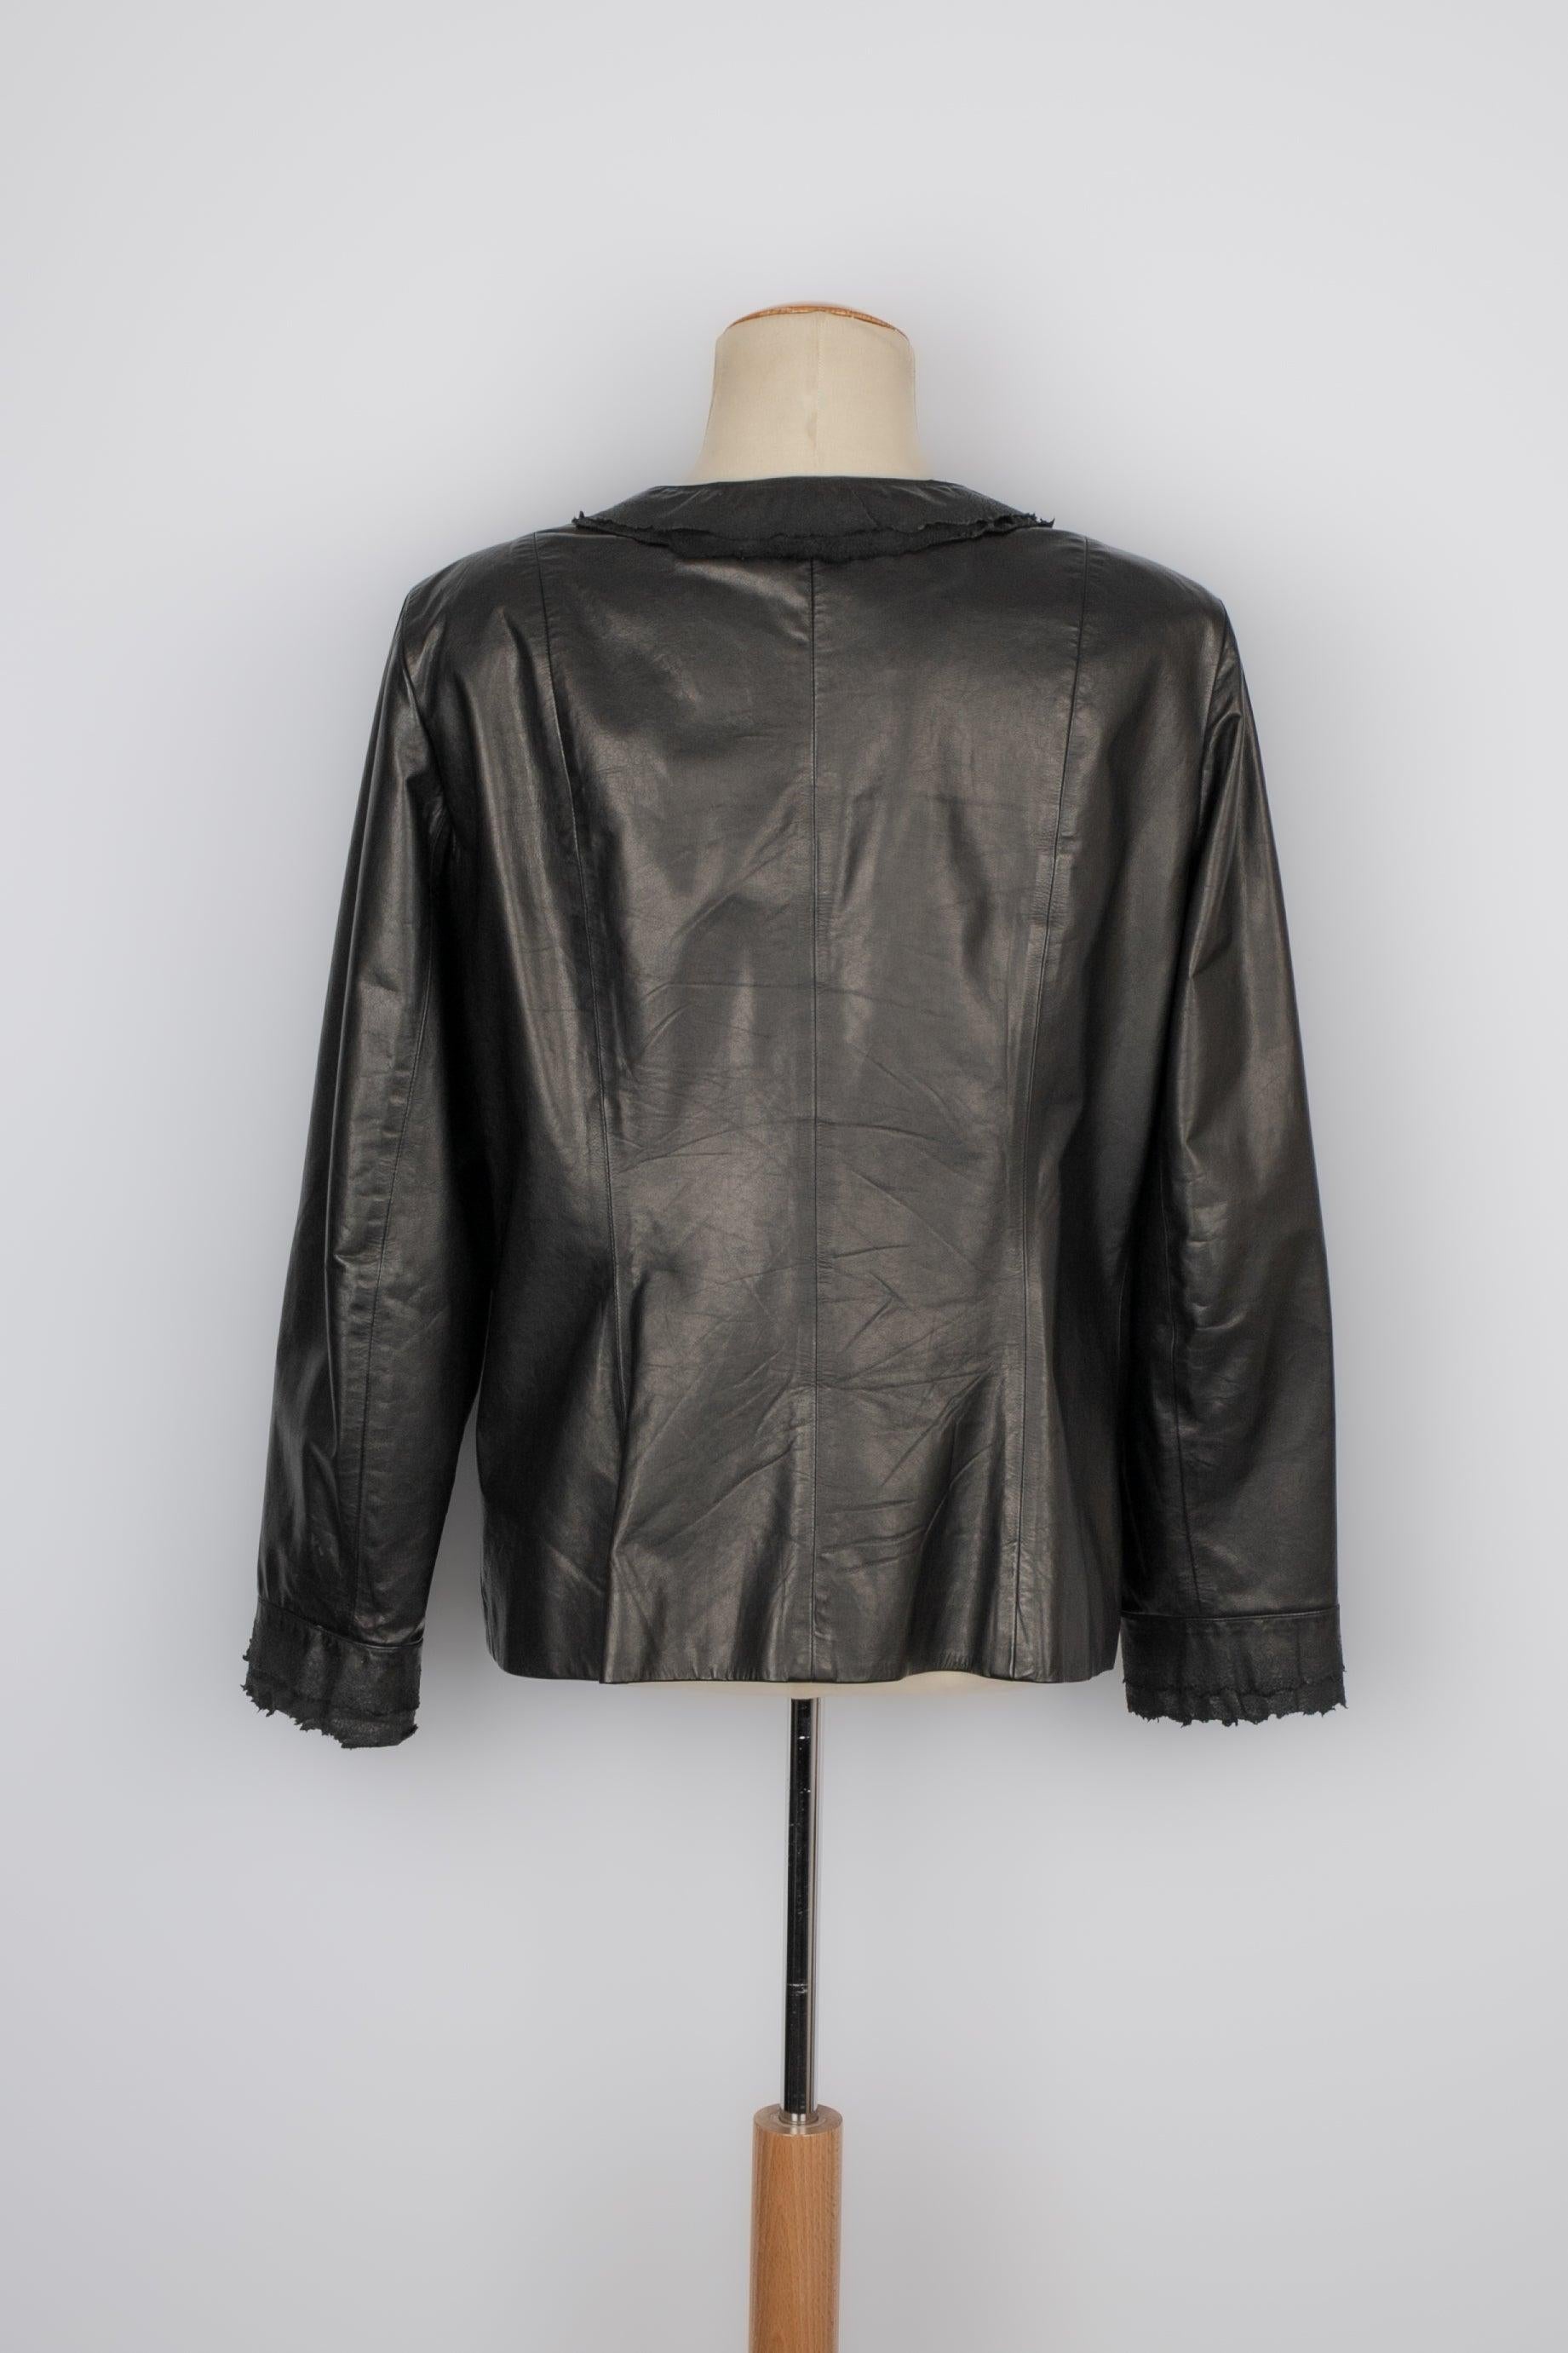 Chanel Leather Jacket in Black Calfskin and Silk Lining In Excellent Condition For Sale In SAINT-OUEN-SUR-SEINE, FR